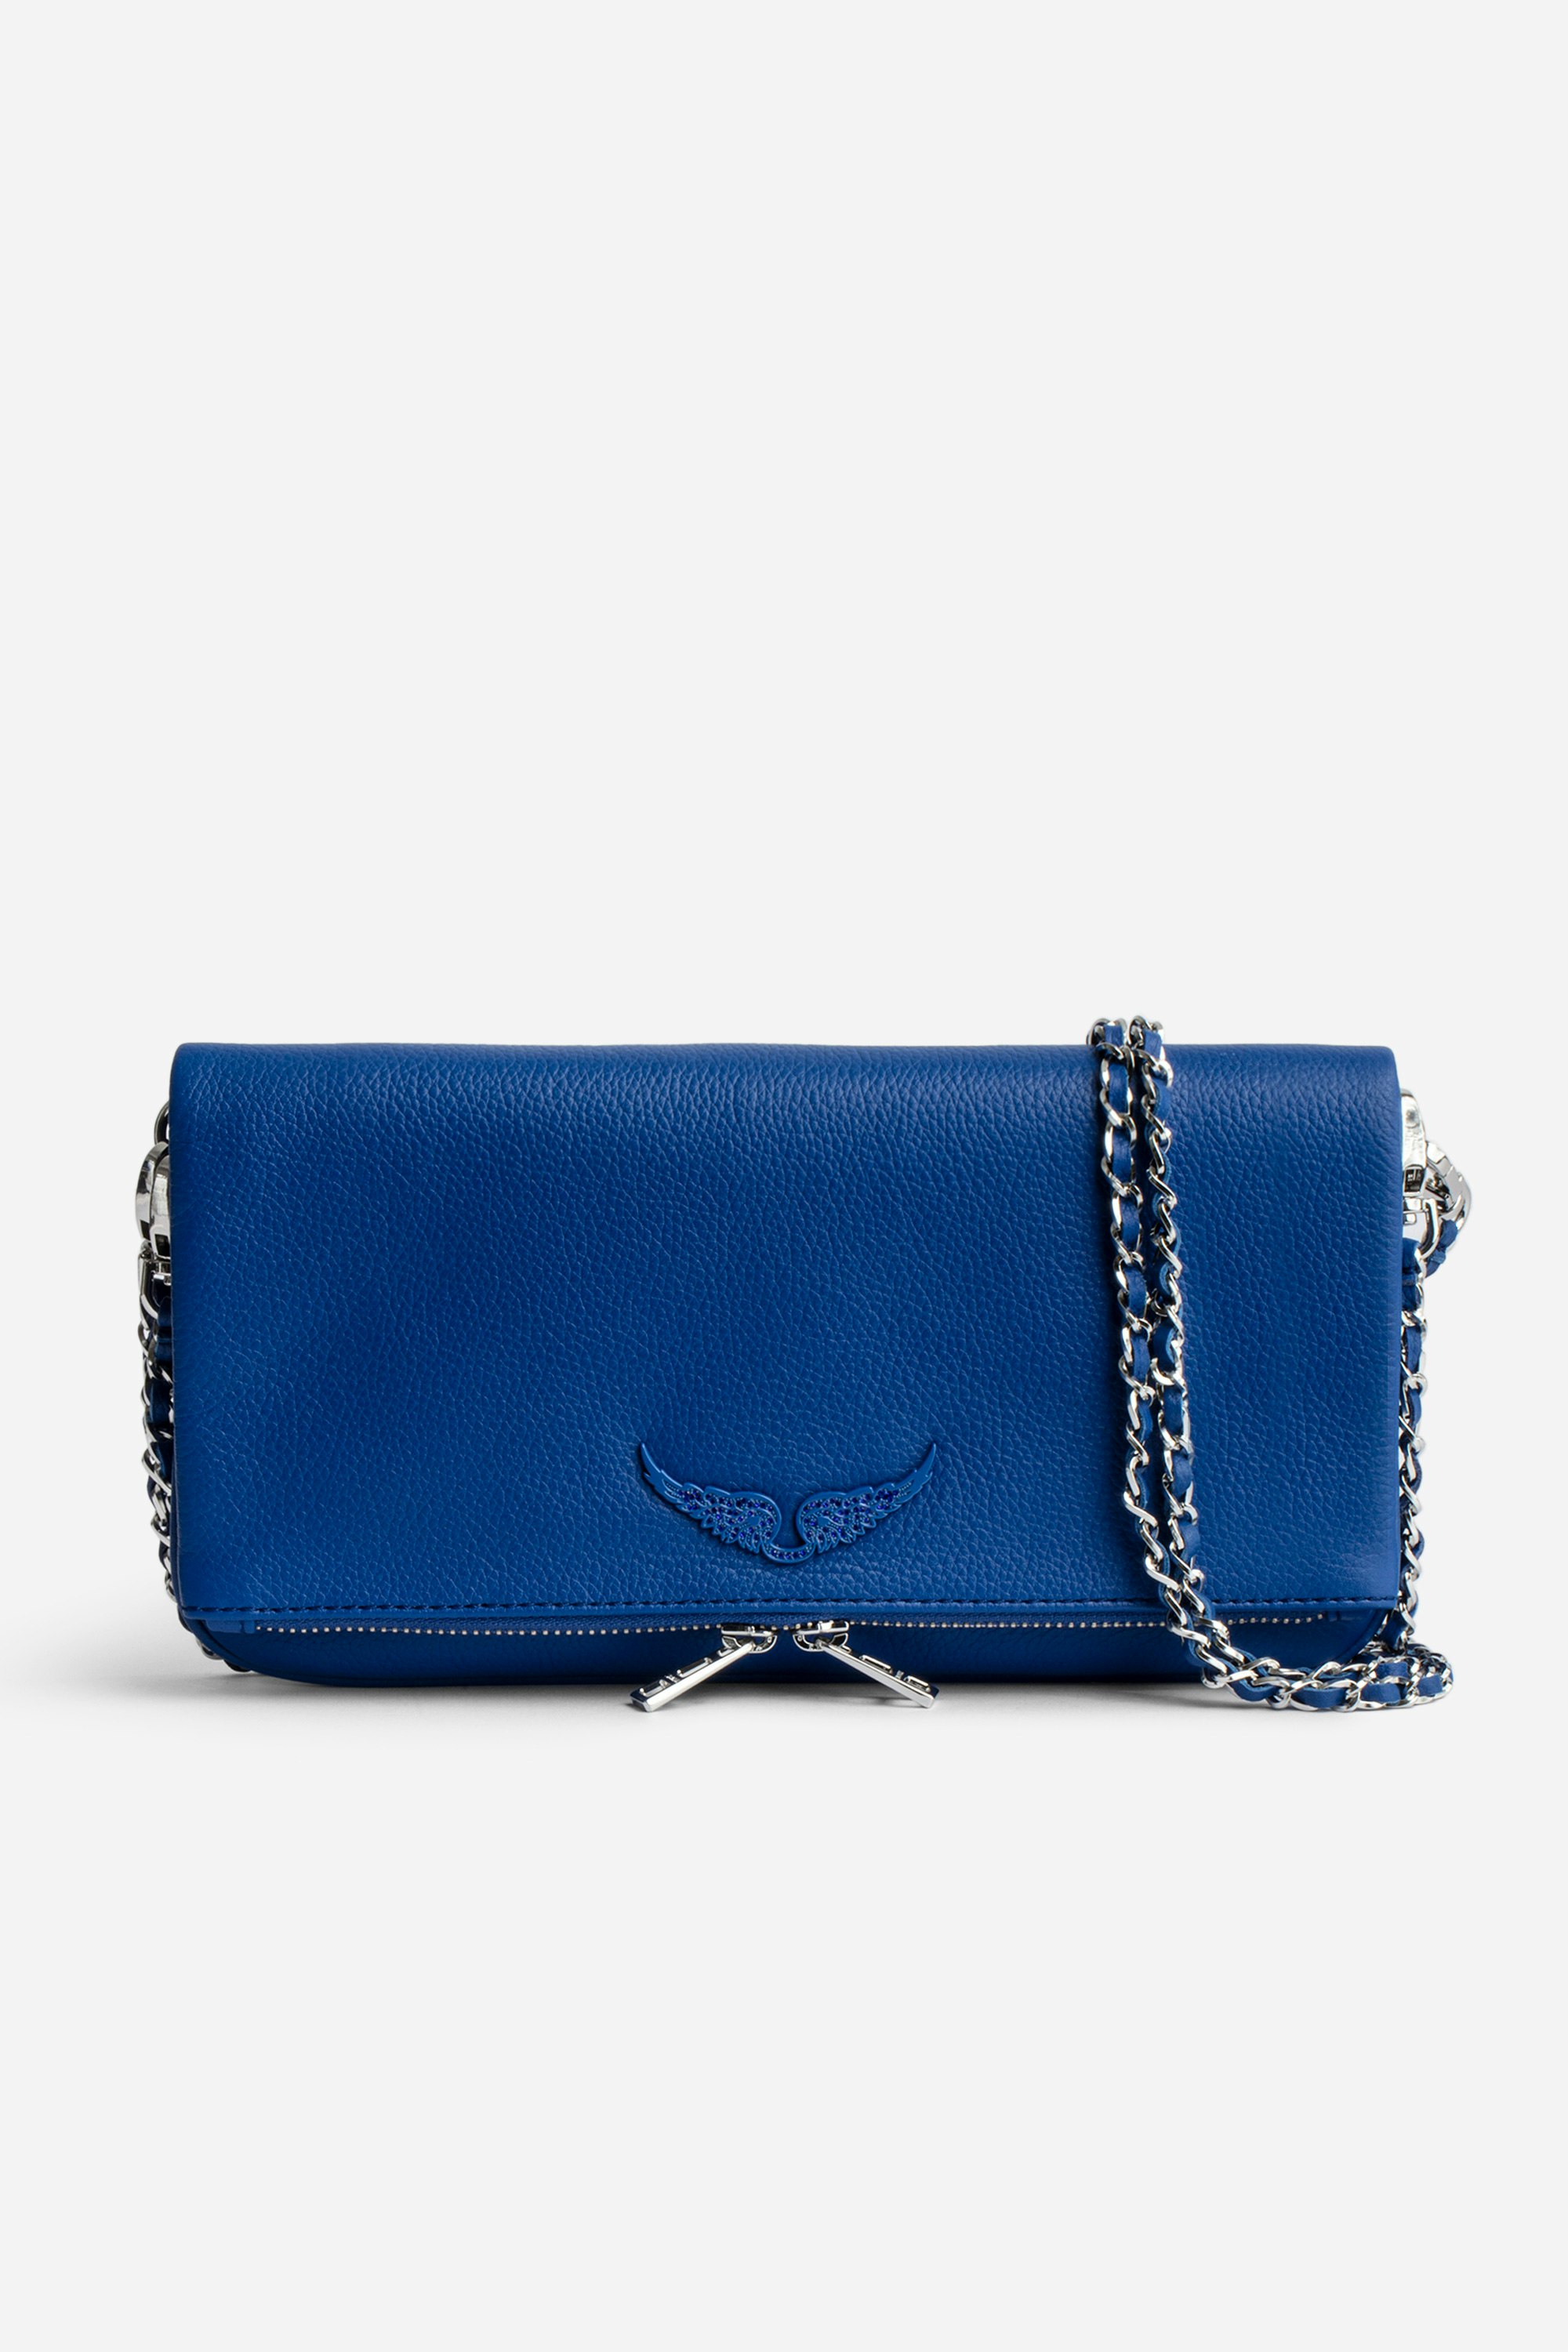 Rock Clutch - Women’s blue grained leather clutch bag with double leather and metal chain strap.